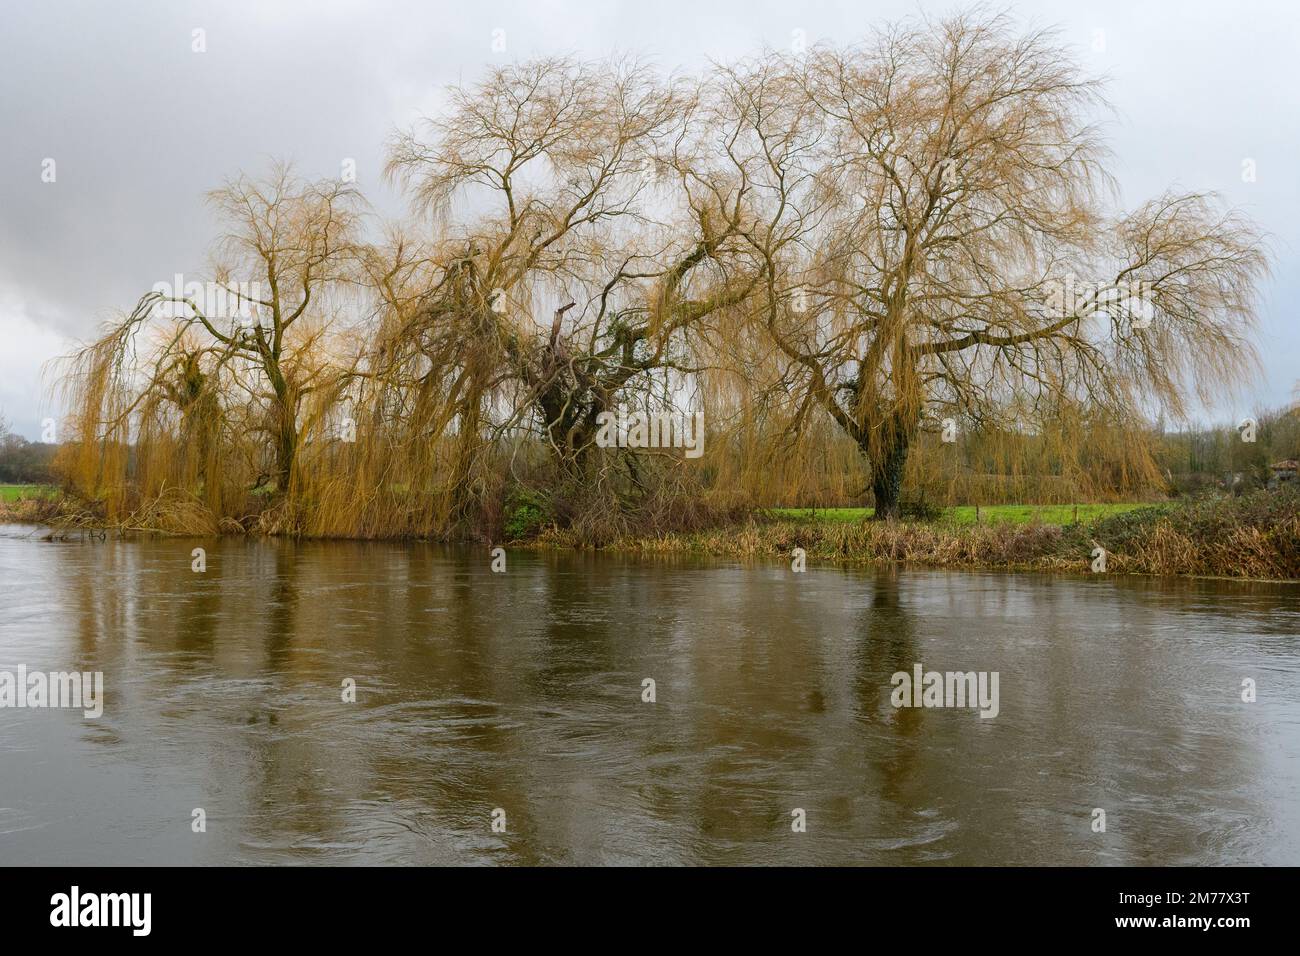 Three weeping willow trees (Salix babylonica) on a riverbank with reflection in water Stock Photo